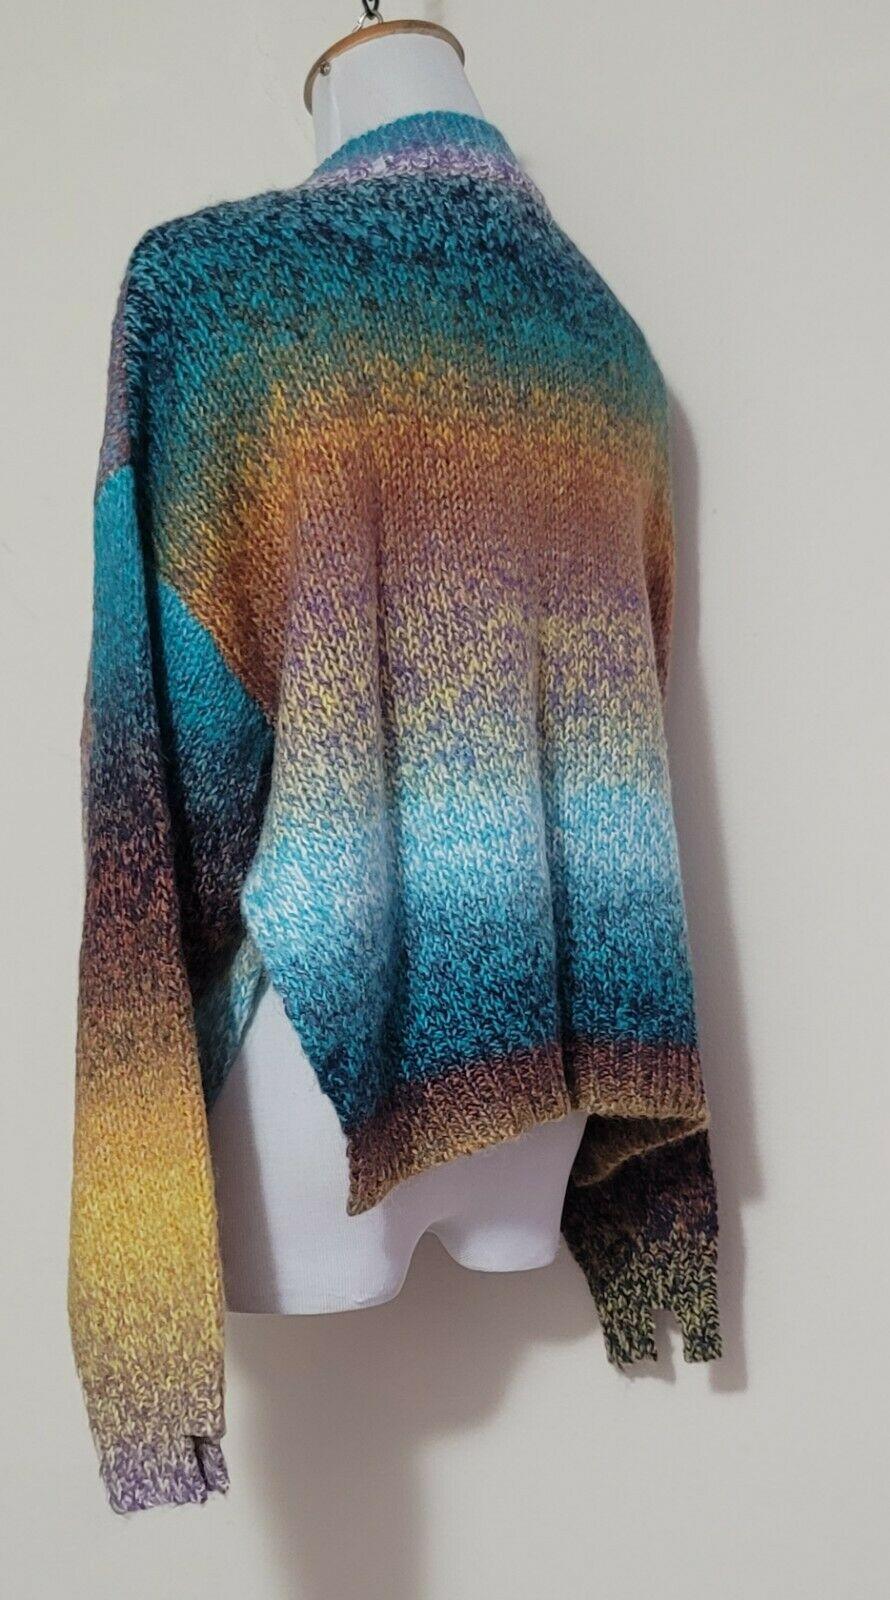 Amoli Knitted Multi Color Blue Yellow Distressed V Neck Sweater Size S/M - SVNYFancy